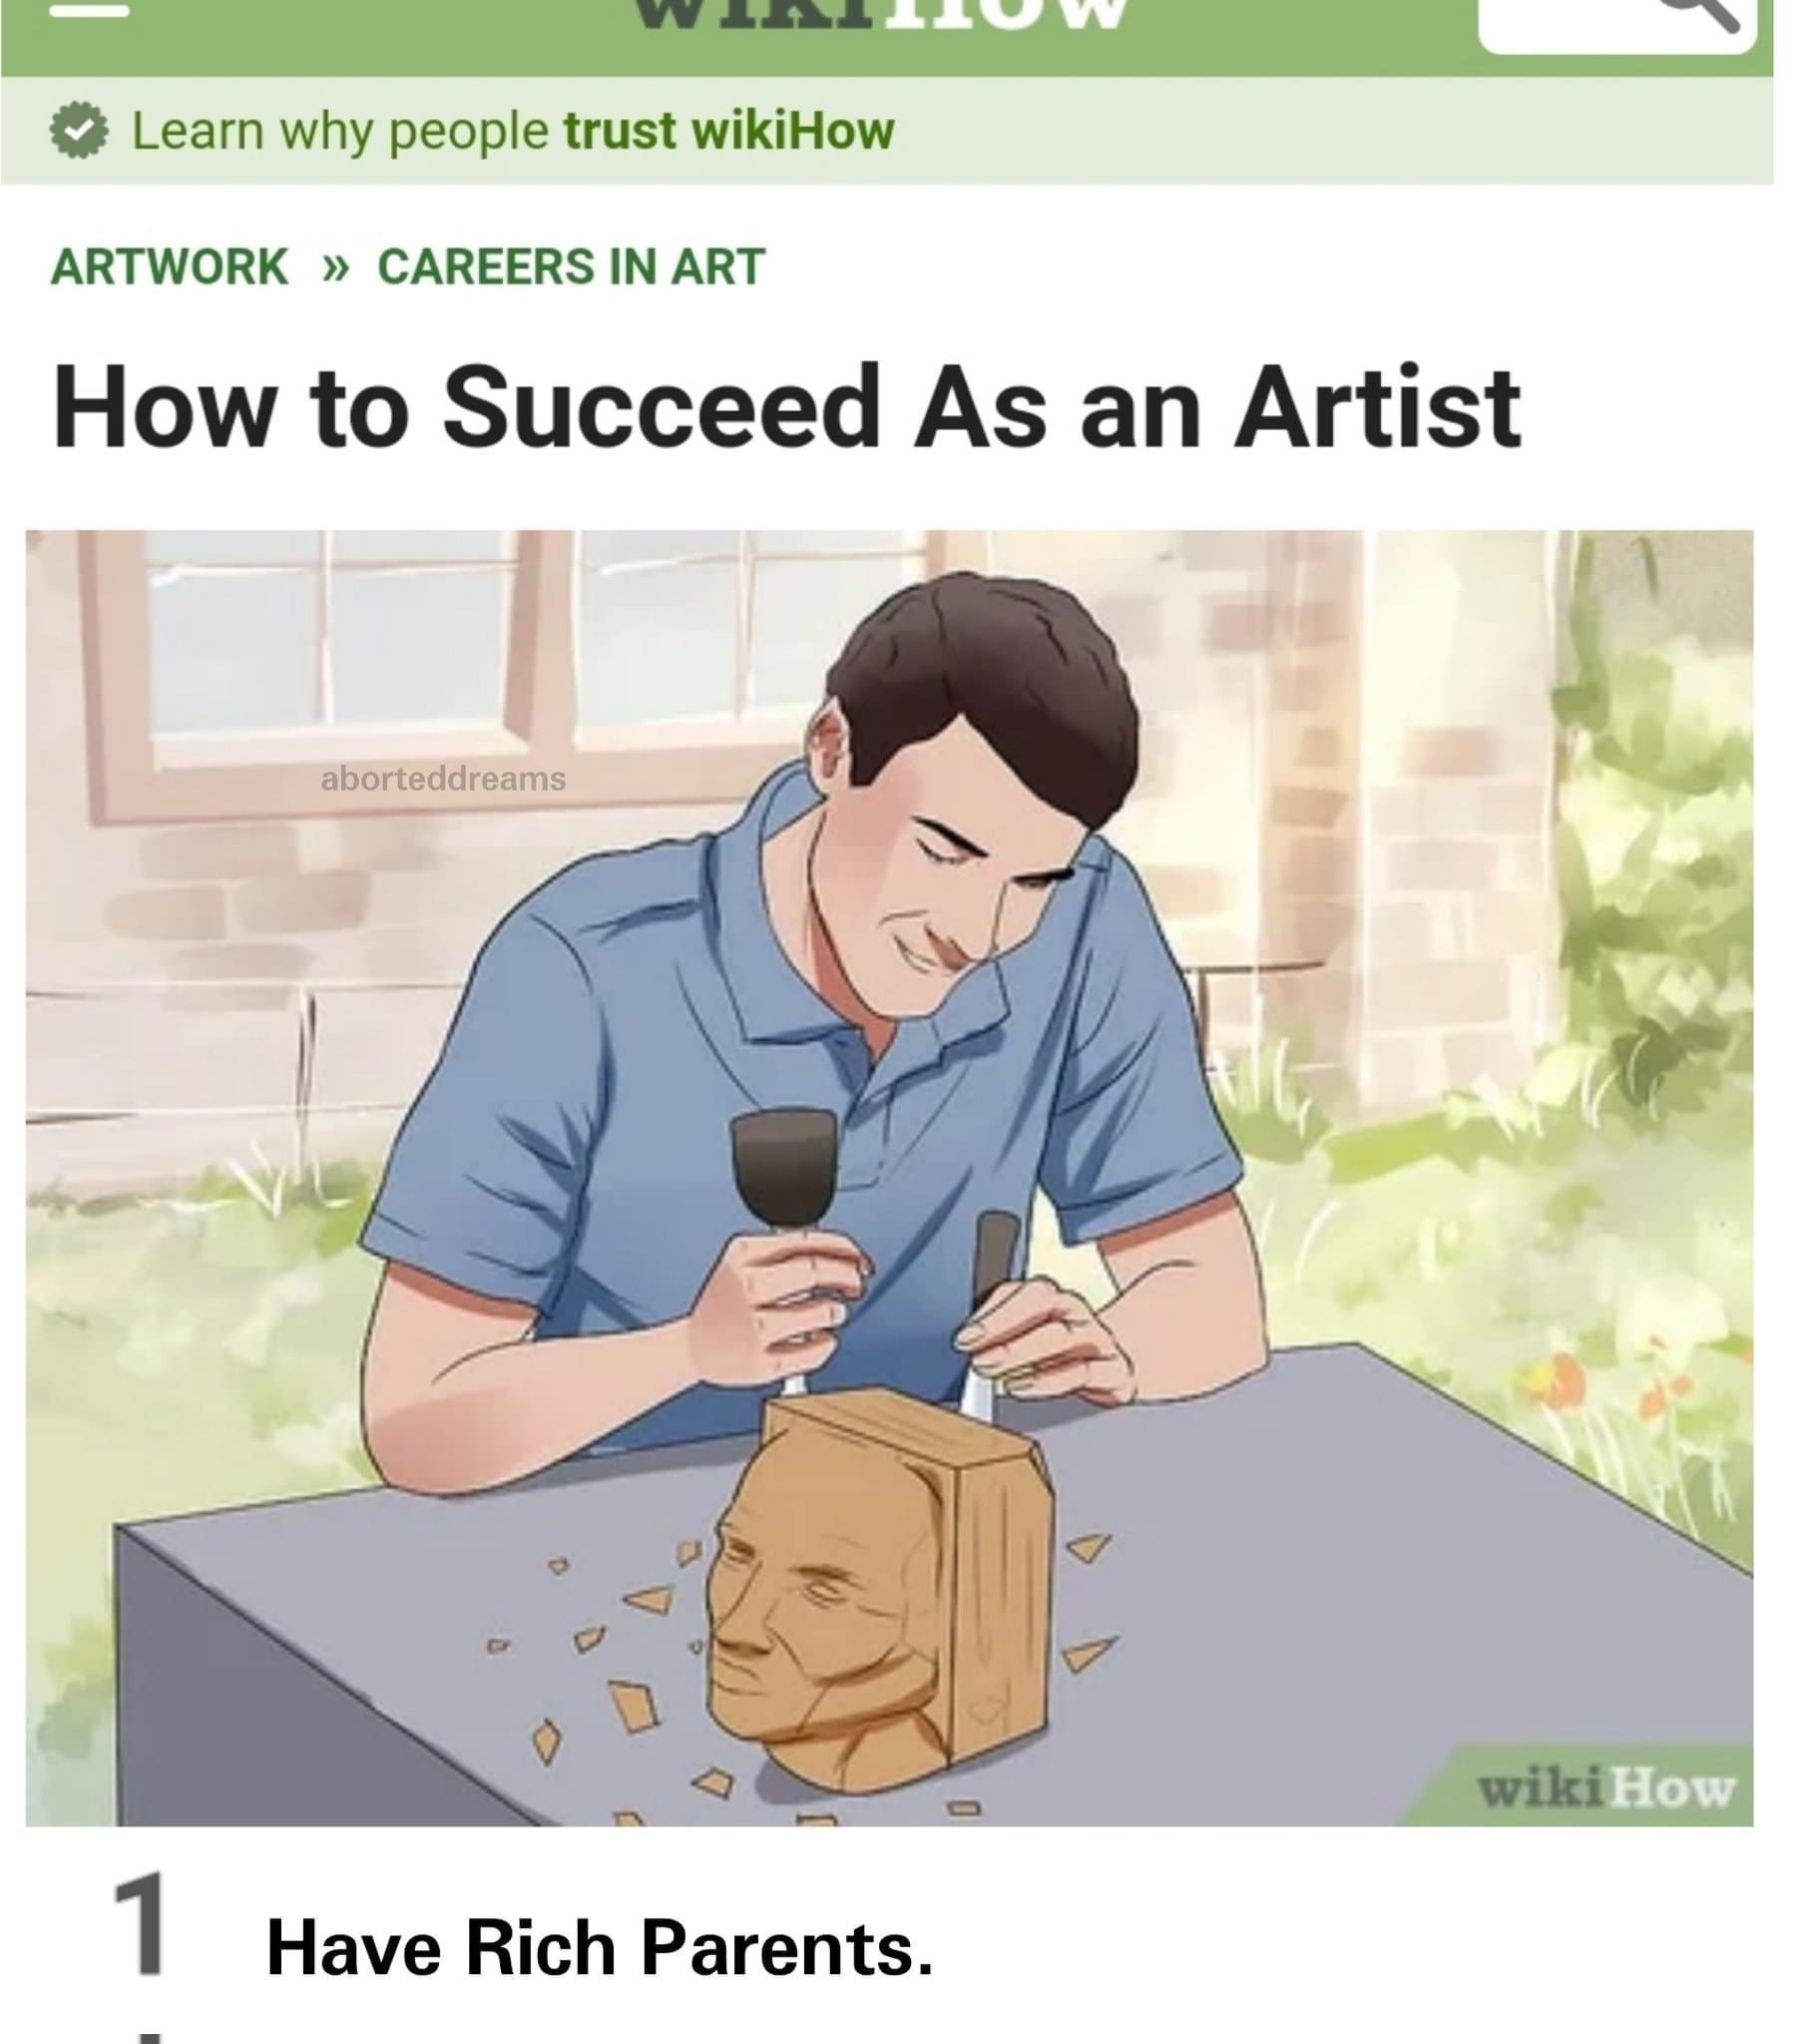 funny memes - dank memes - Art - Learn why people trust wikiHow Artwork Careers In Art How to Succeed As an Artist aborteddreams kill wikiHow 0 1 Have Rich Parents.